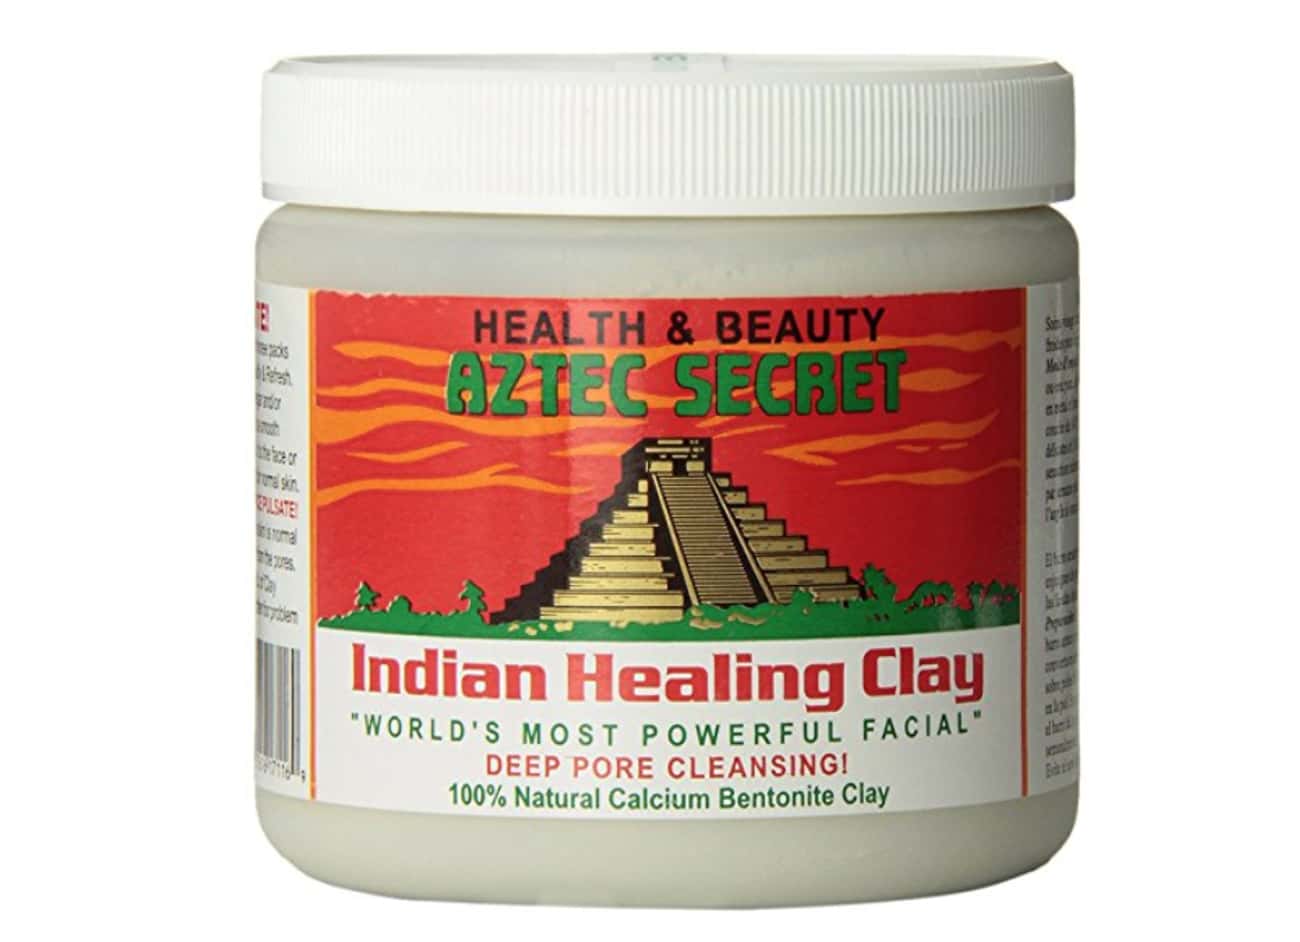 Indian Healing Clay By Aztec Secret